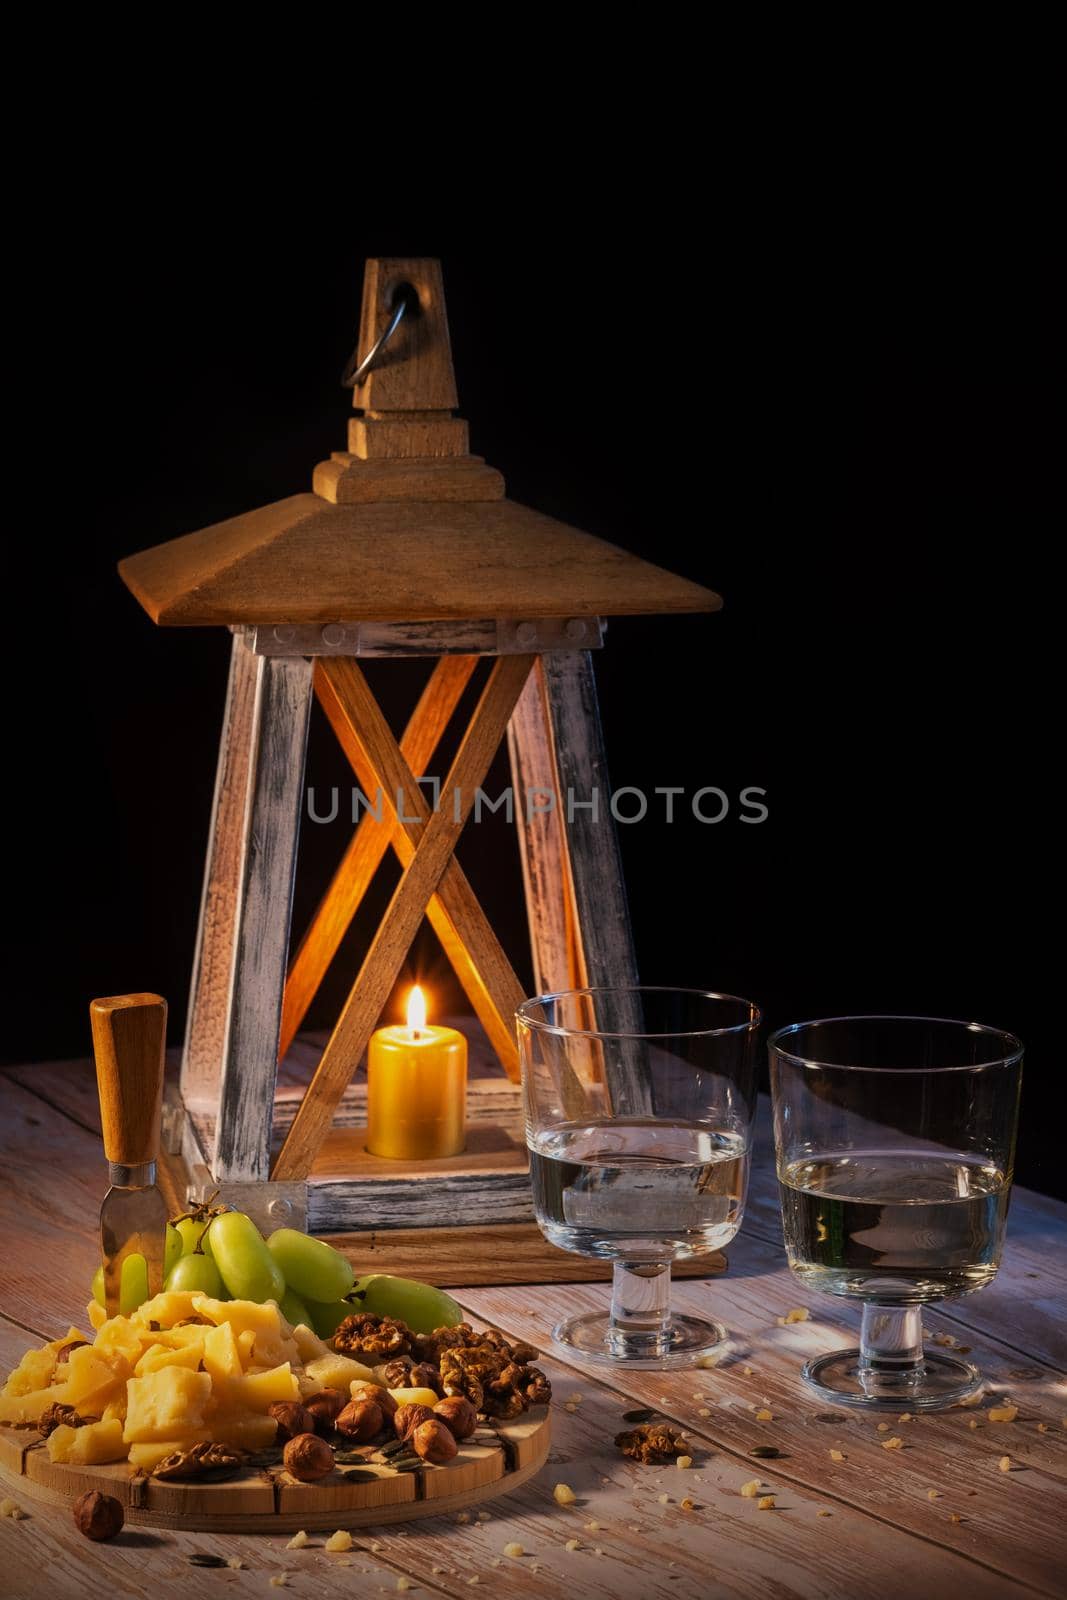 Cheese plate with a variety of snacks on the table with two glasses of wine by candlelight.